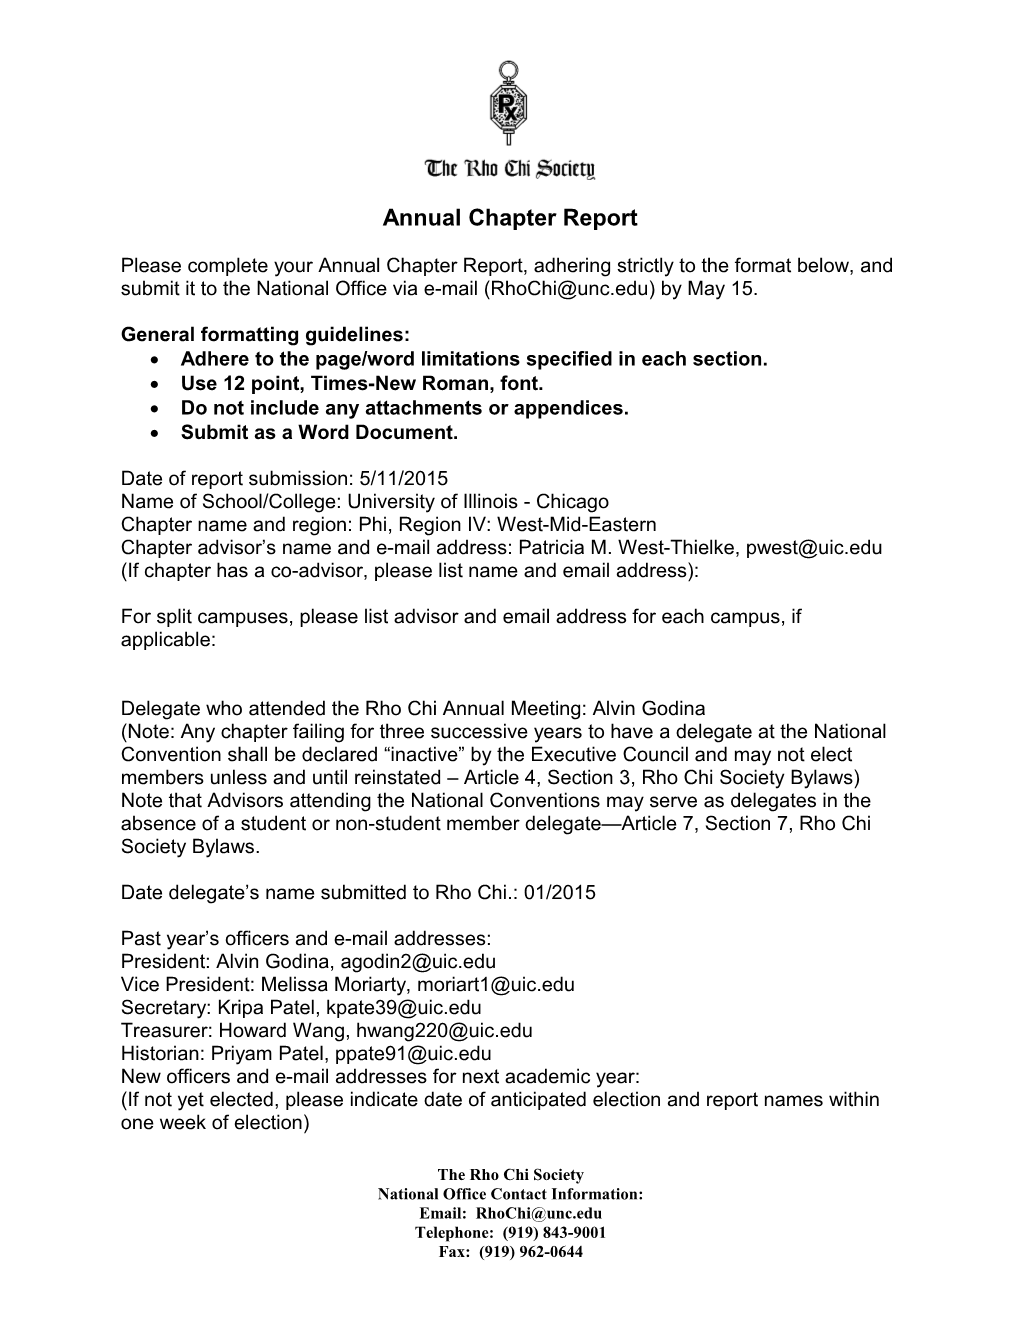 Annual Rho Chi Chapter Report s1